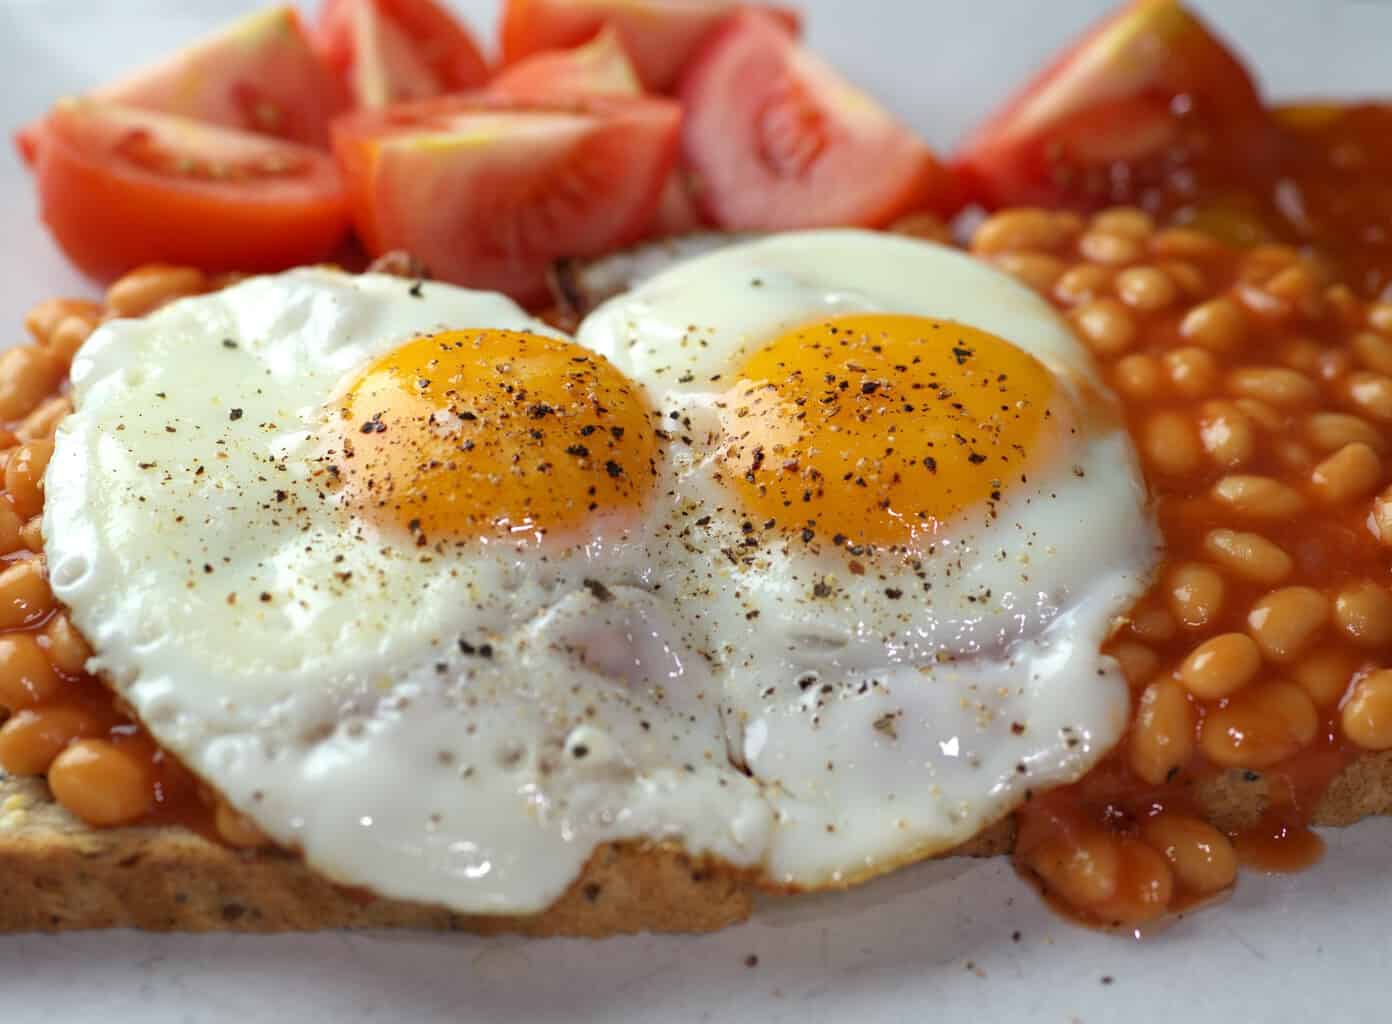 Beans and fried eggs on toast